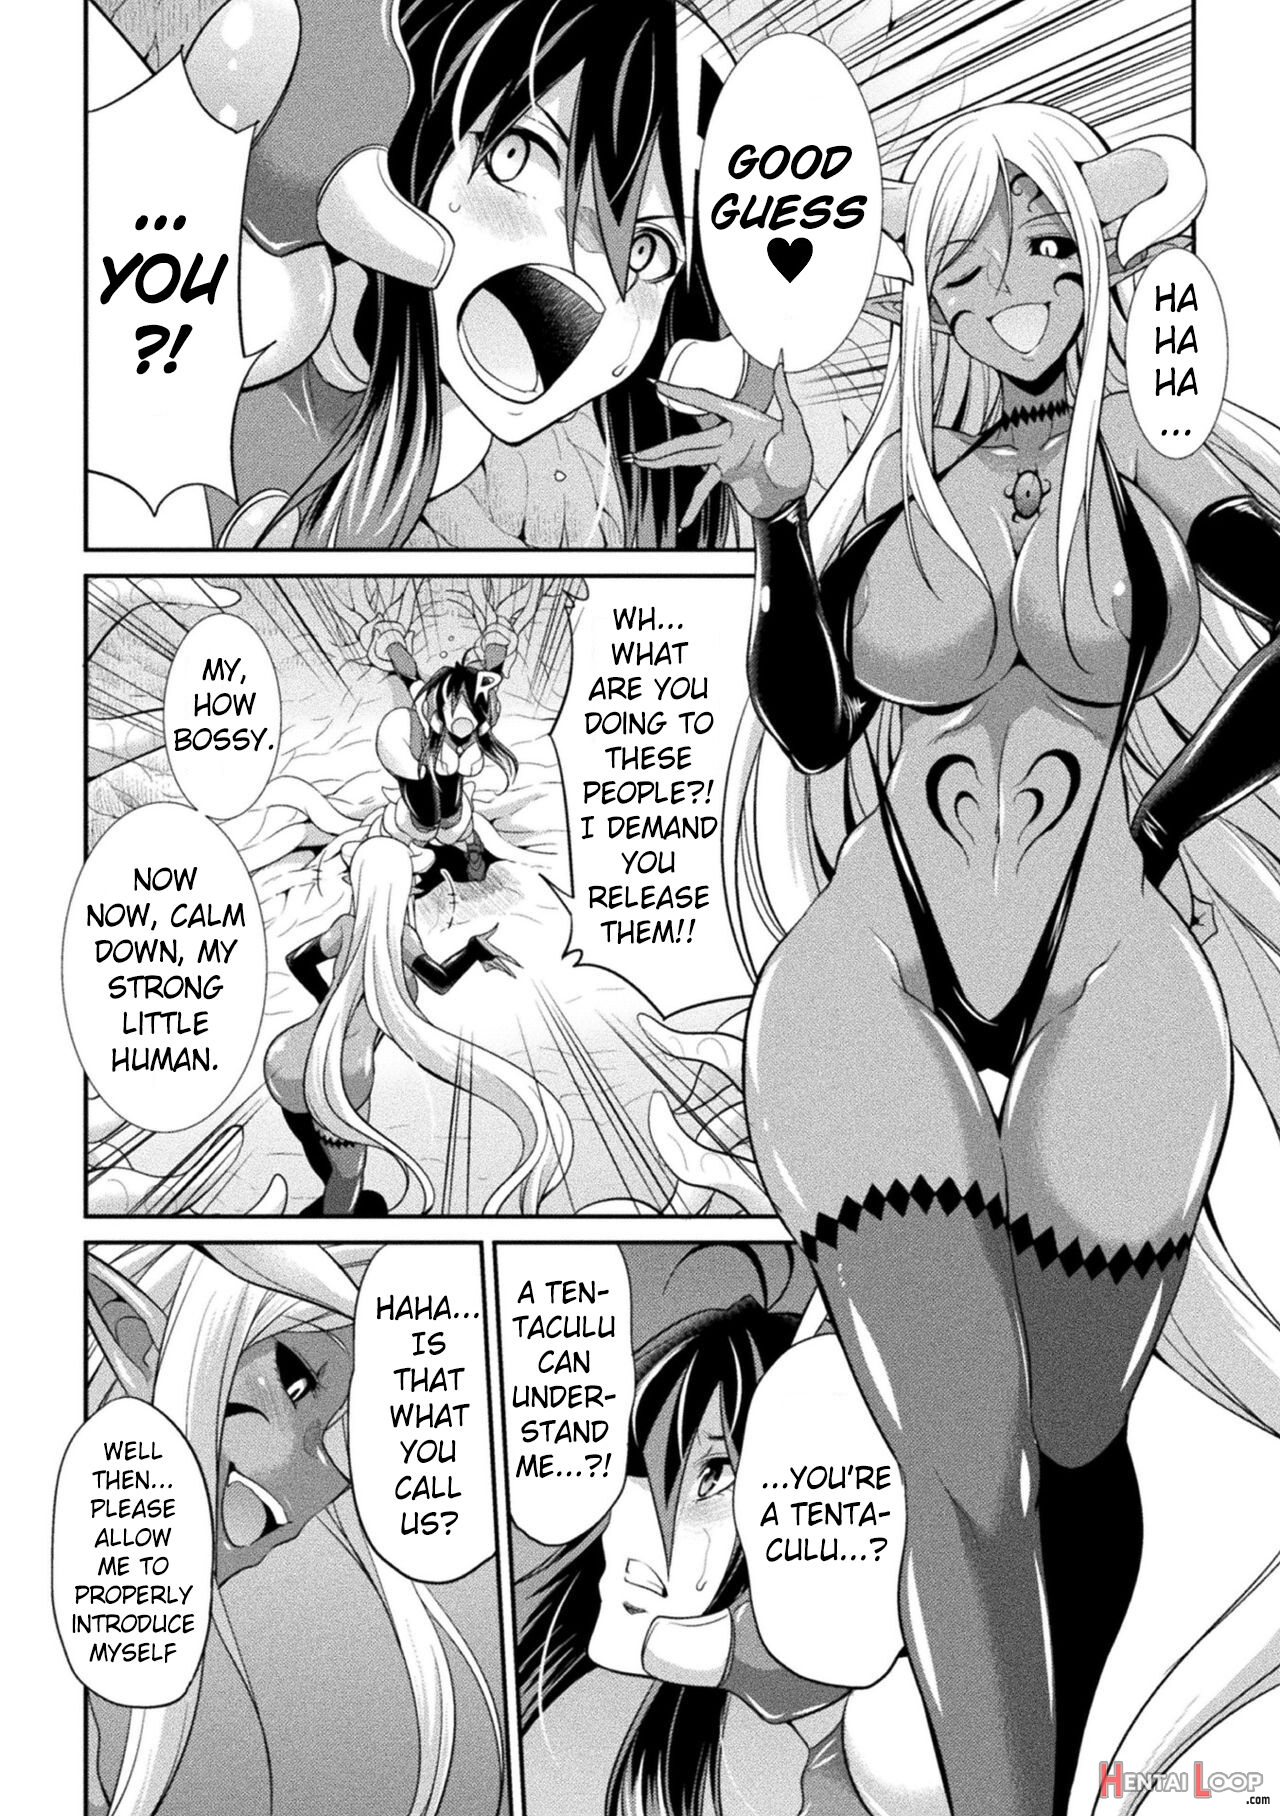 Special Duty Squadron Colorful Force Heroines Of Justice Vs The Tentacle Queen! The Great Battle Of Futa Training!? page 16